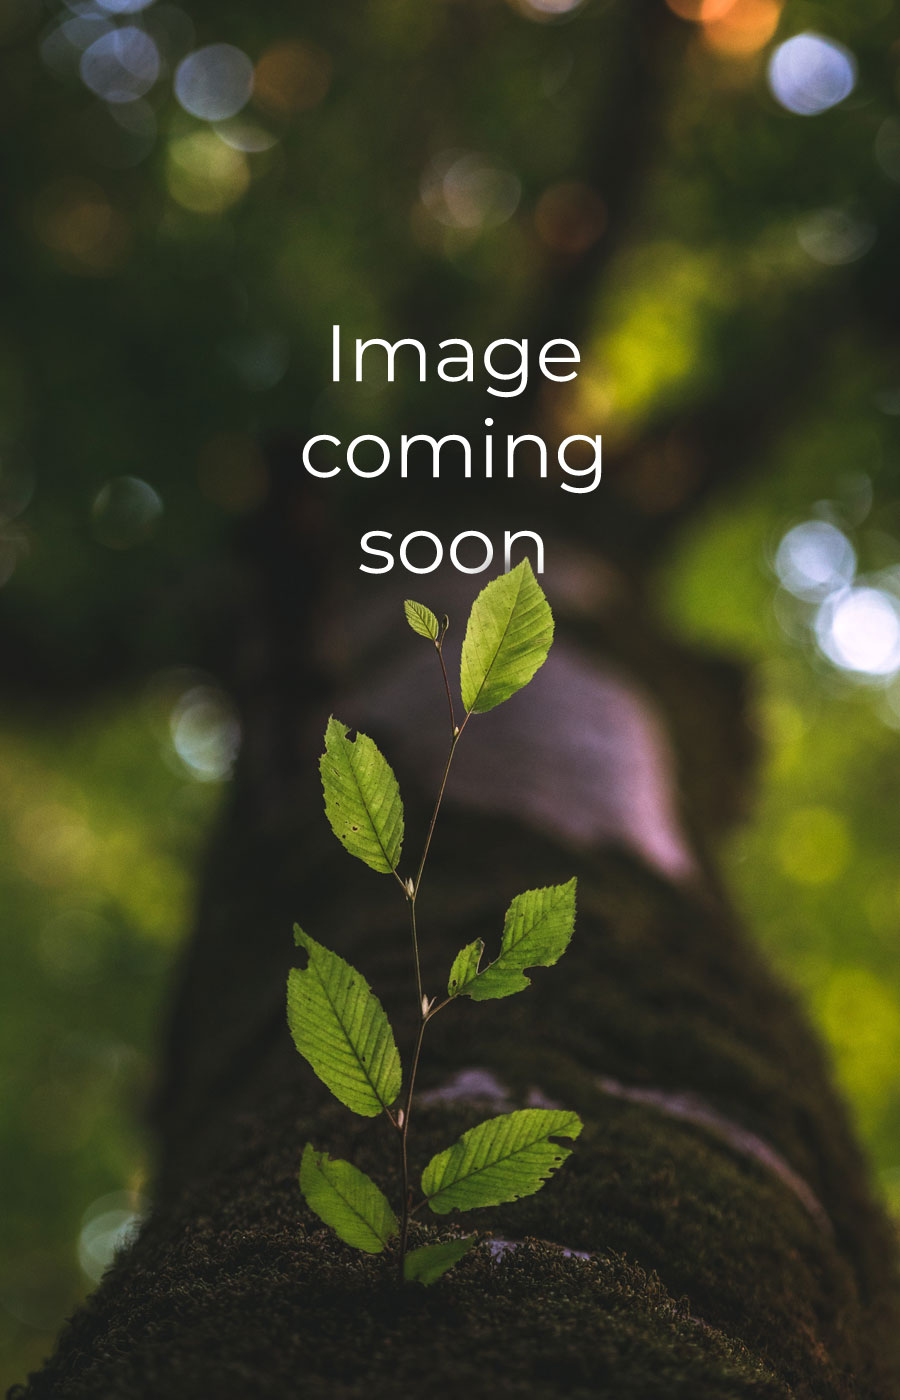 Small tree branch growing with "Image coming soon" text